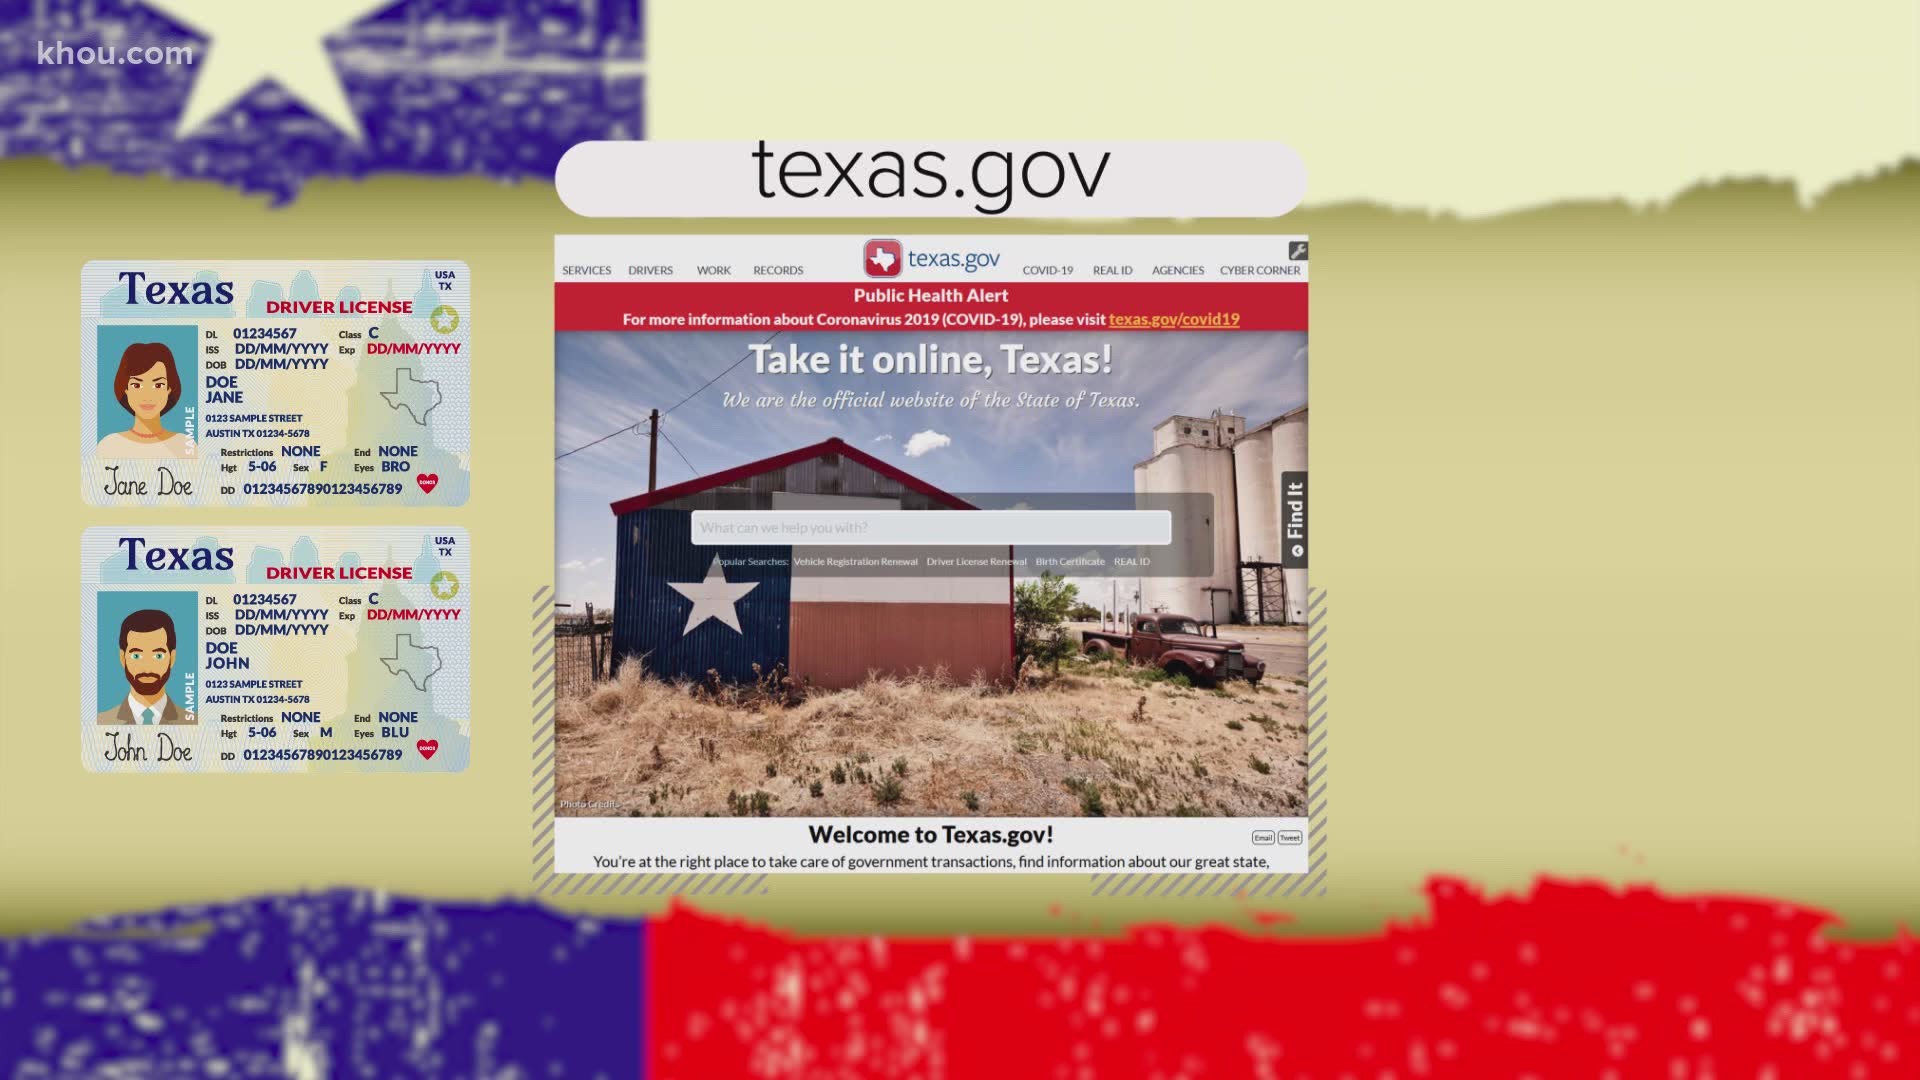 If you have an expired license or vehicle registration in Texas, the state is giving you until April 14, 2021 to get it renewed. Here are ways to beat the deadline.